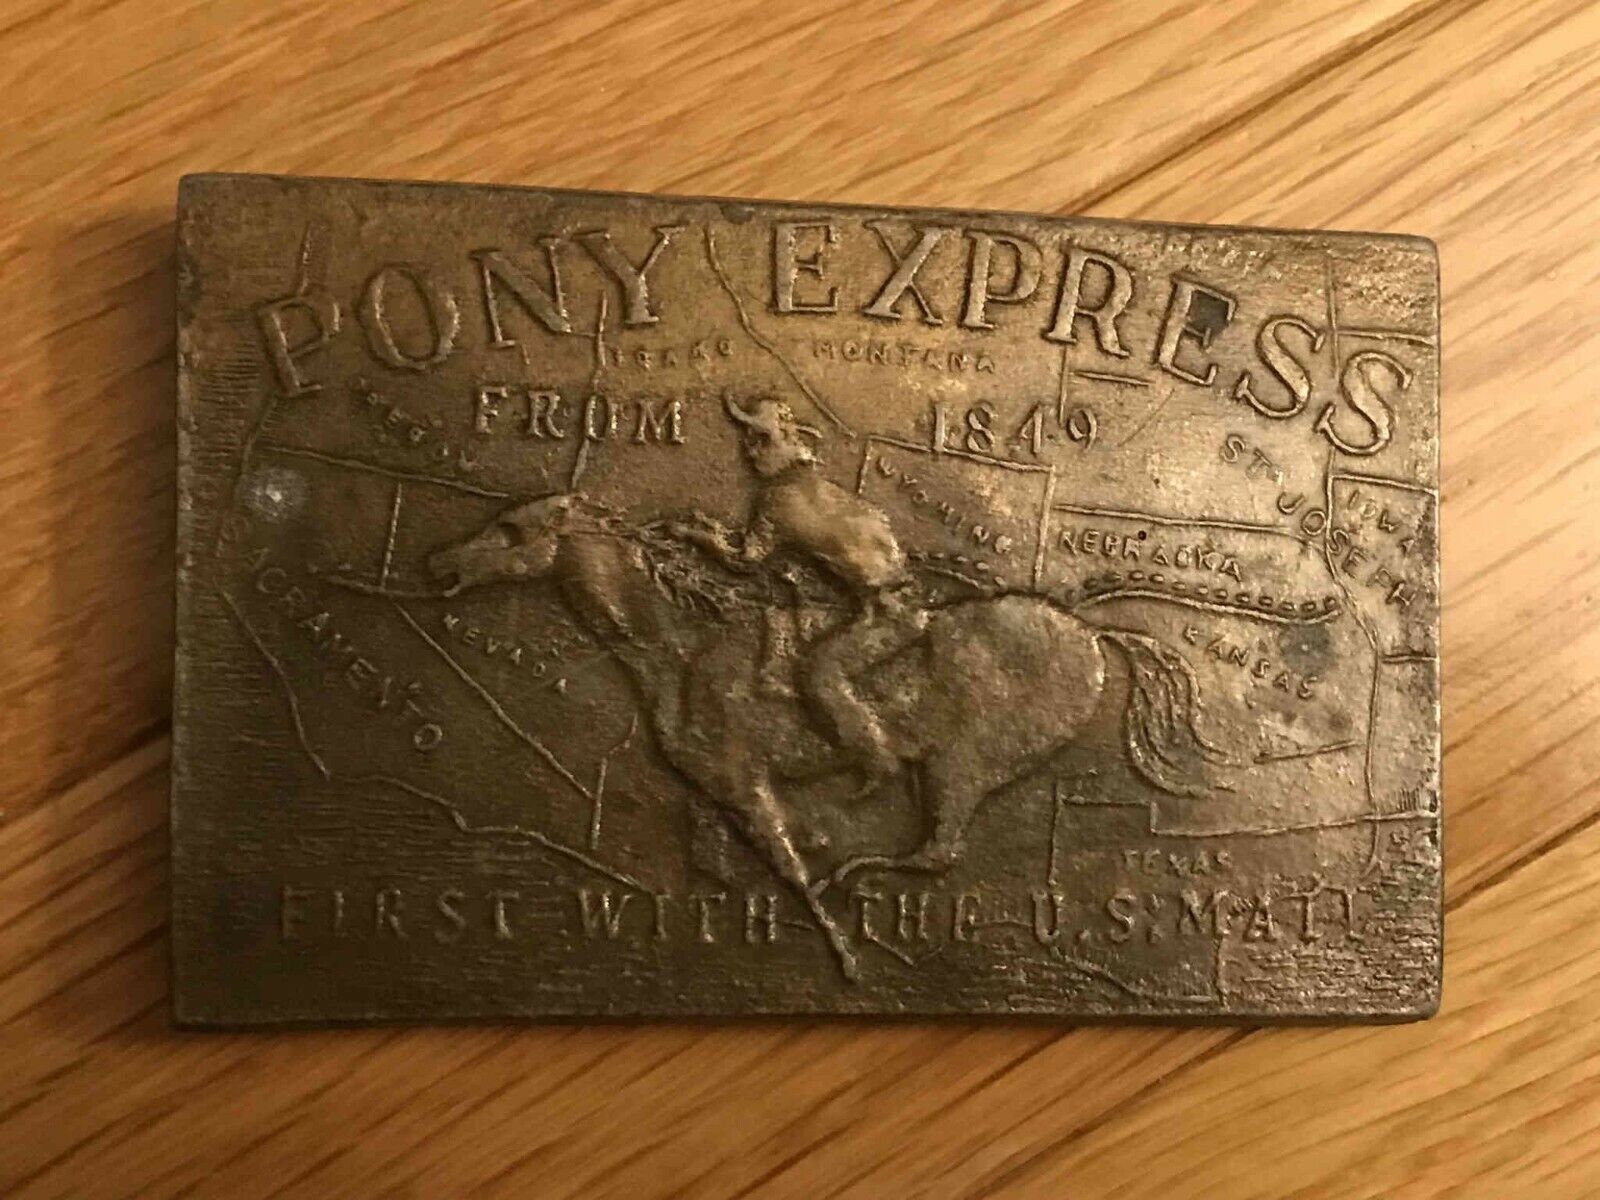 VTG PONY EXPRESS 1849 BRASS BELT BUCKLE FIRST WITH THE U.S. MAIL Map Background